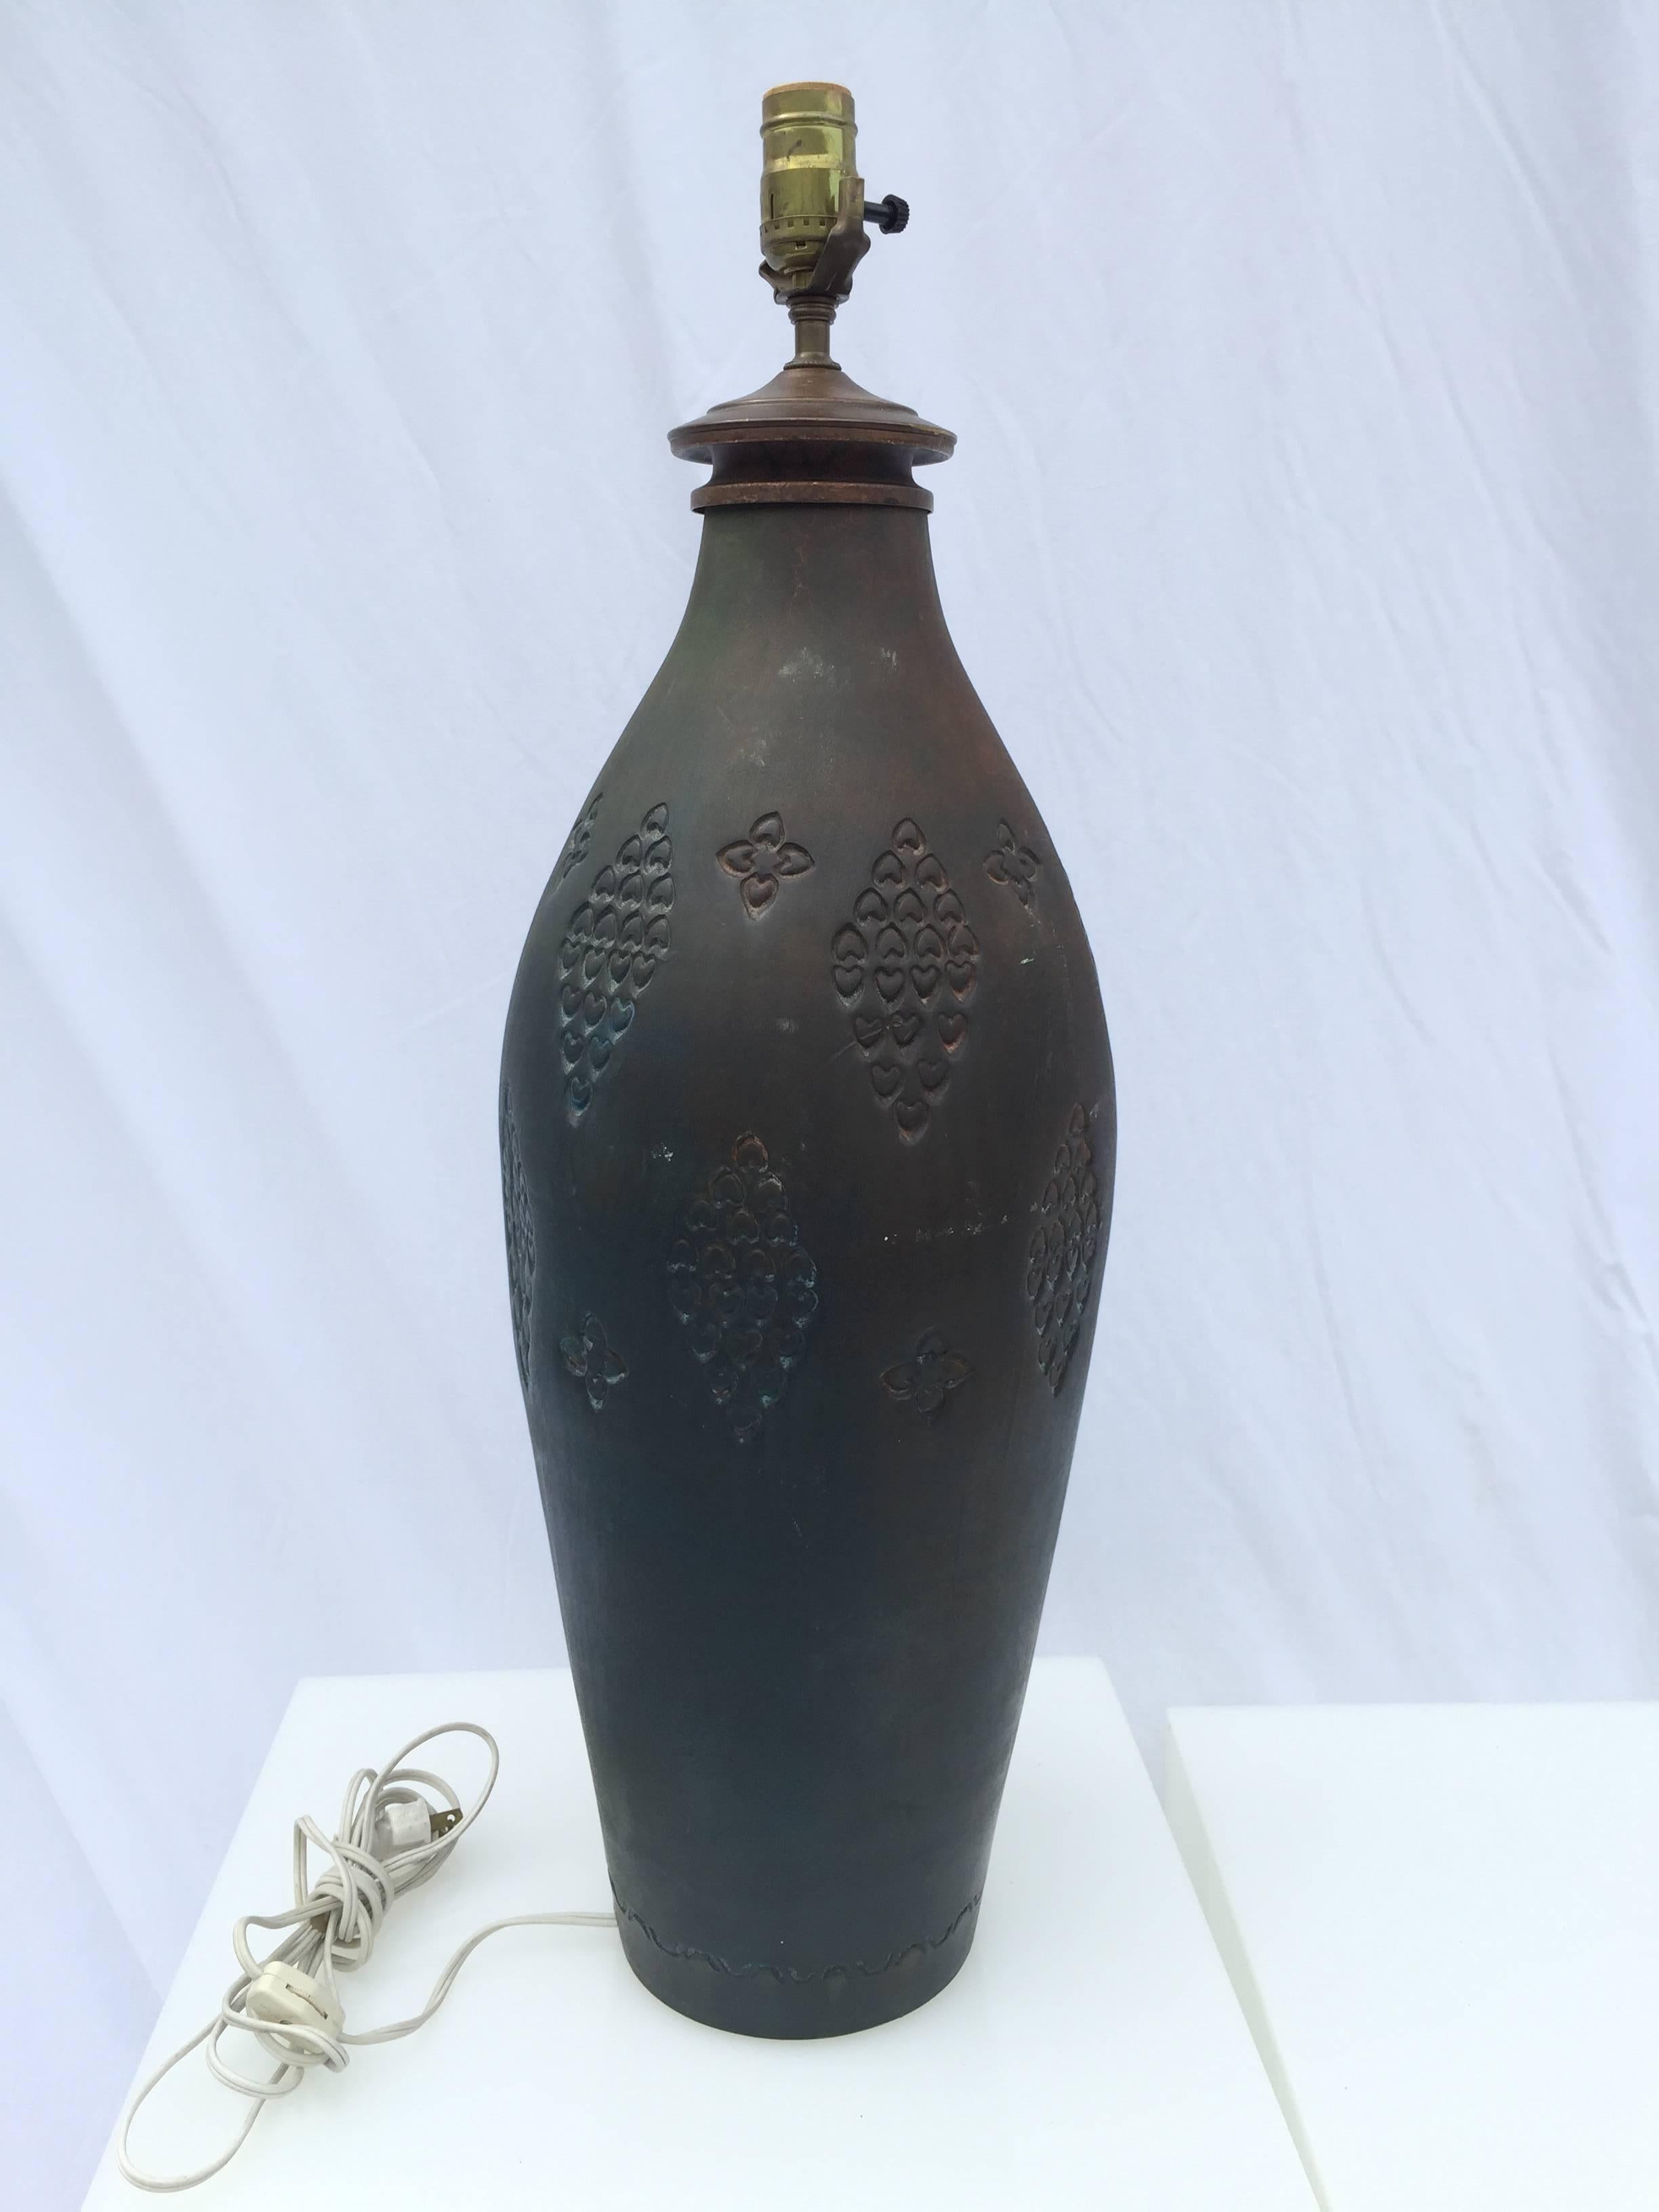 The deep, dark finish has burnished colors throughout the glaze. The impressed hearts are in various designs all-over the lamp. With a broad shoulder and slender foot. The base is in pastel colors and is inscribed base made Italy with a